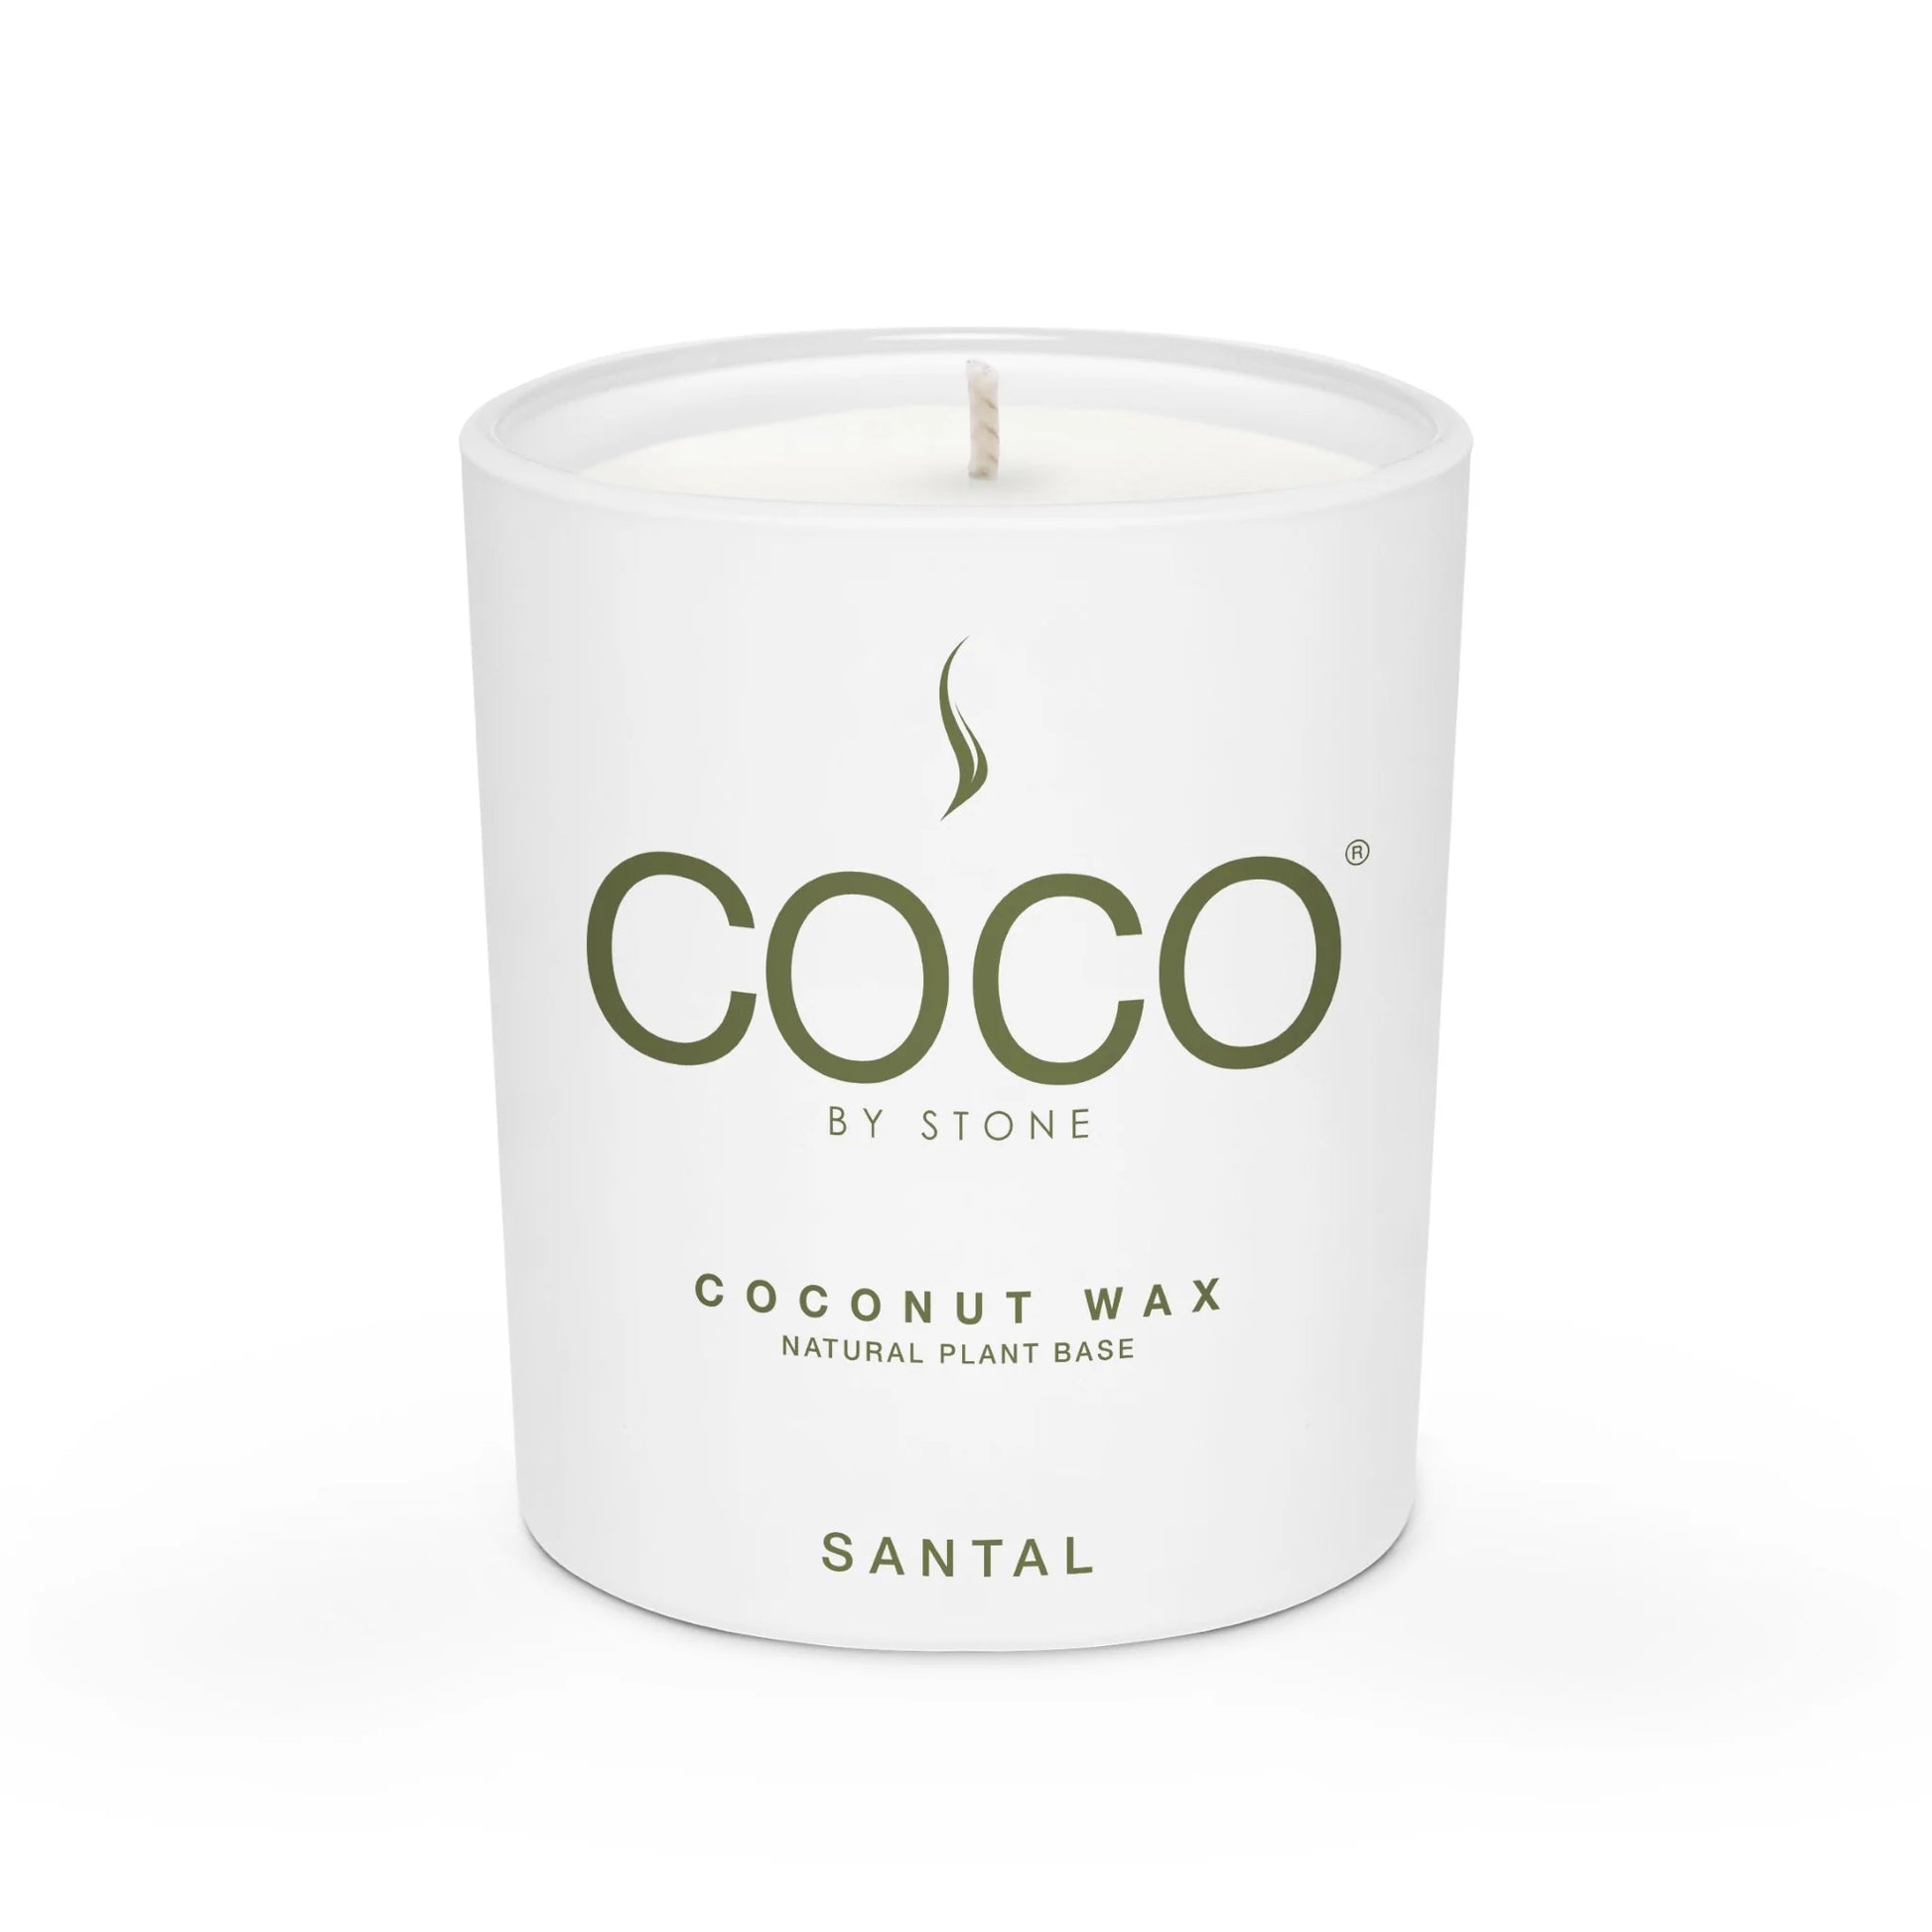 Broluxe Ltd. Co. XL American Bully COCO by Stone Santal - Pet Safe Coconut Wax Candle Minimalist - Food Grade Certified